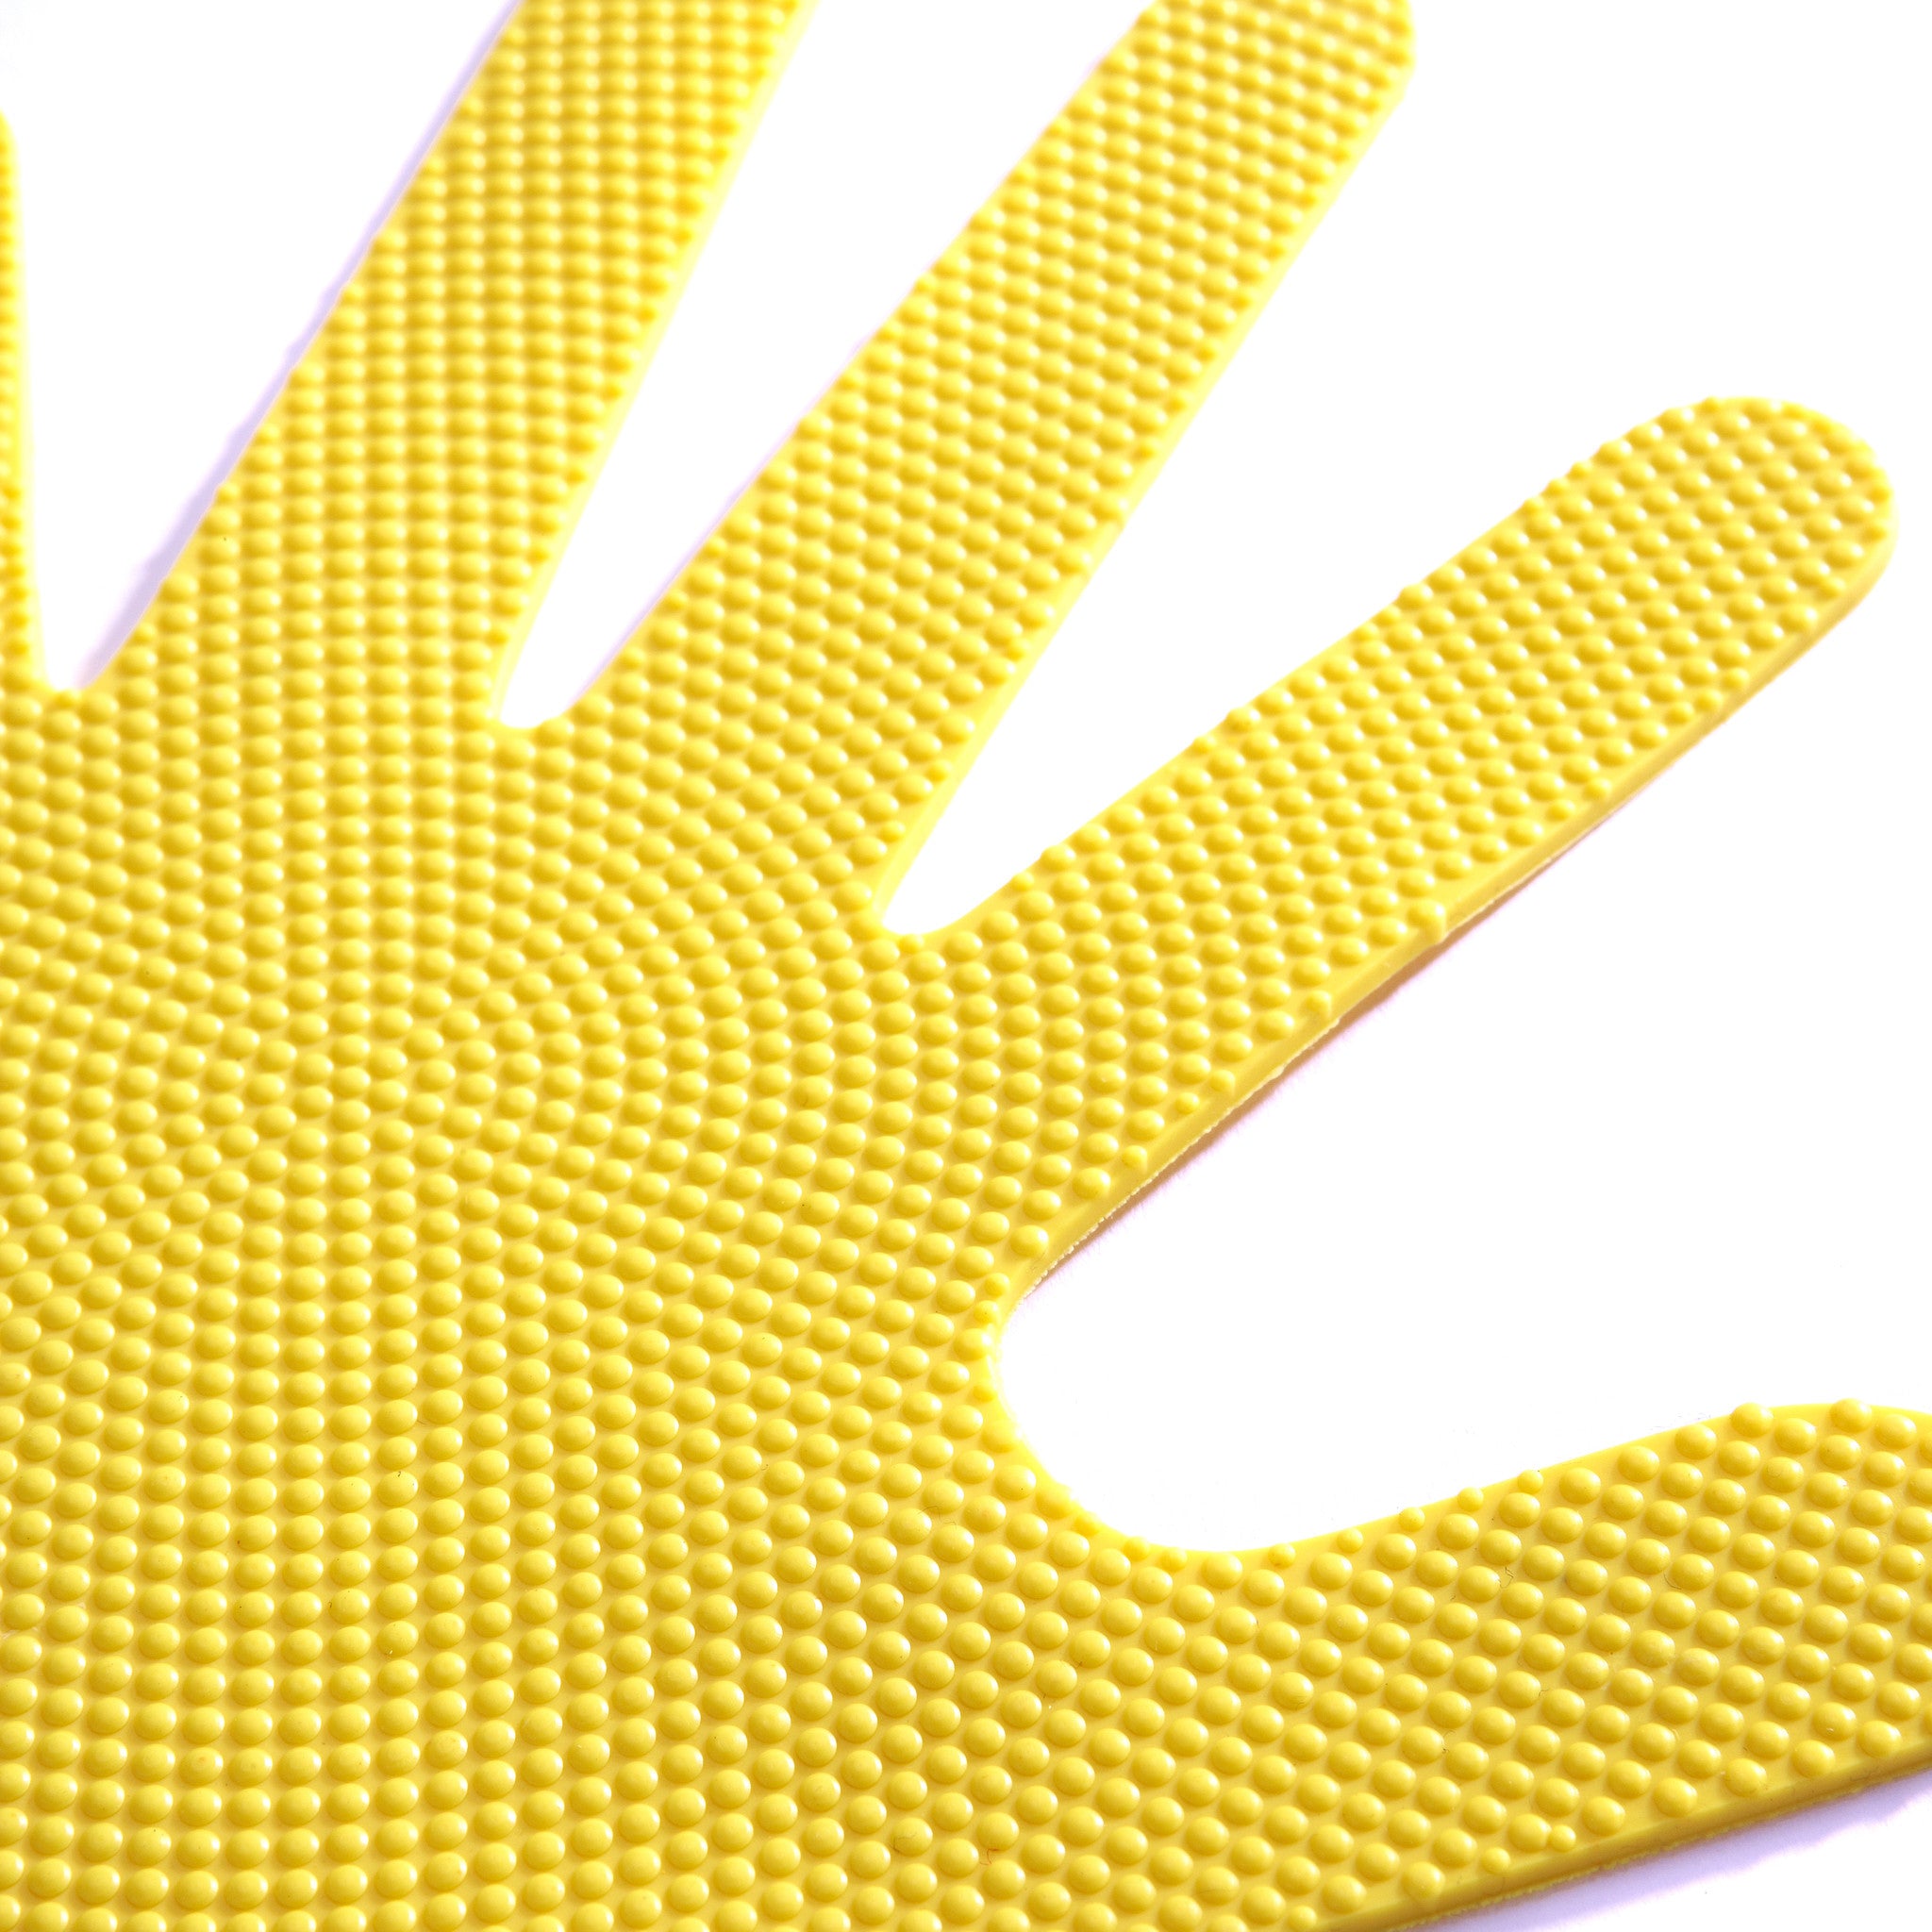 Early Years flat sports marker. Little yellow hand shape, showing textured non-slip underside.